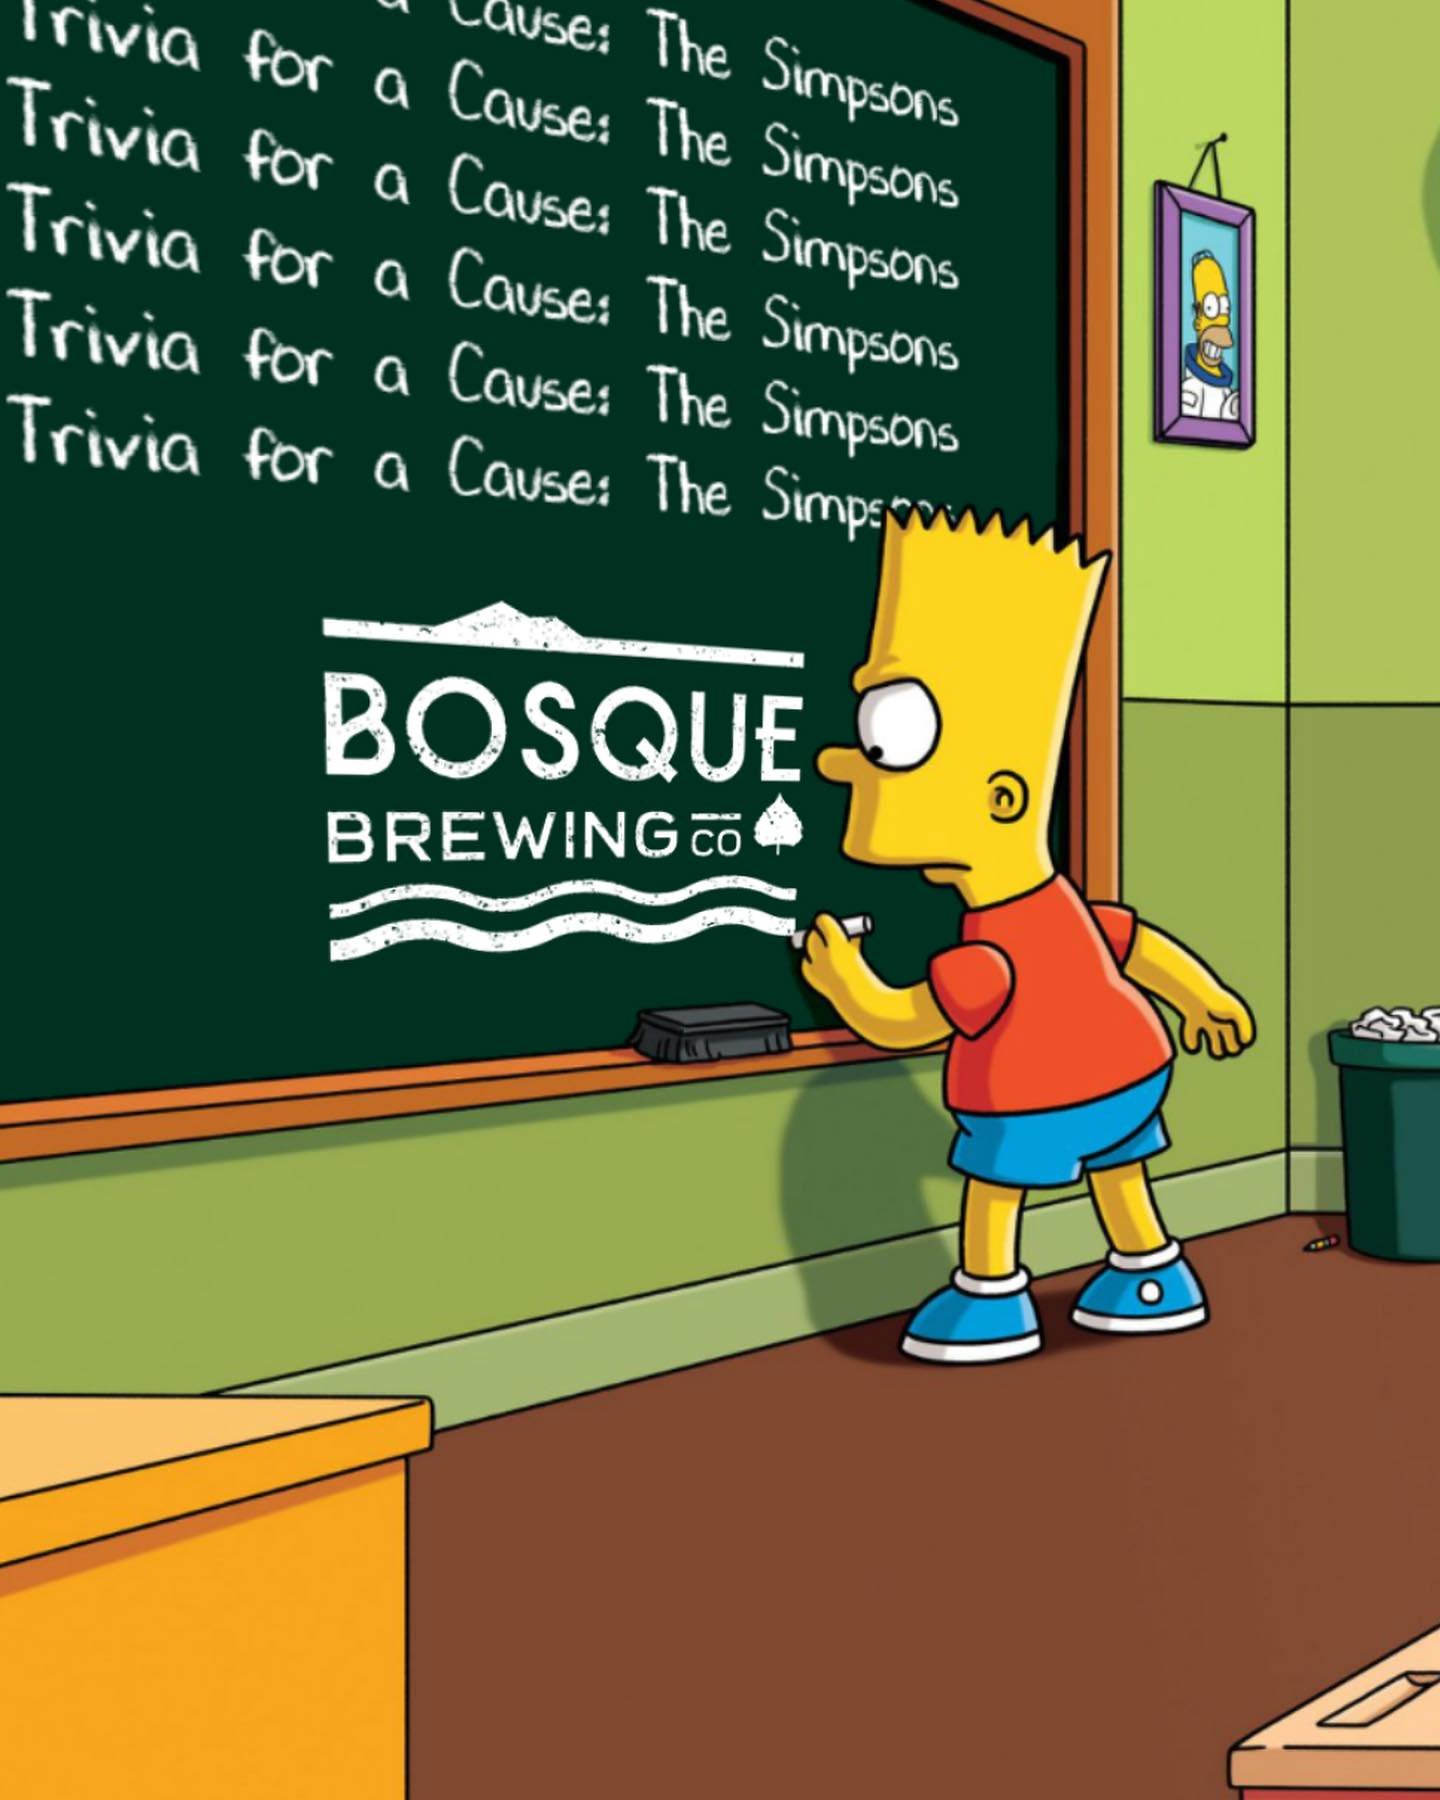 The Simpsons are coming to Cottonwood Public House!

Get ready to dive into the world of The Simpsons, one of the most beloved TV shows of all time, at Trivia for a Cause: The Simpsons edition! What is your ALL-TIME favorite episode? 

📍Wednesday, M